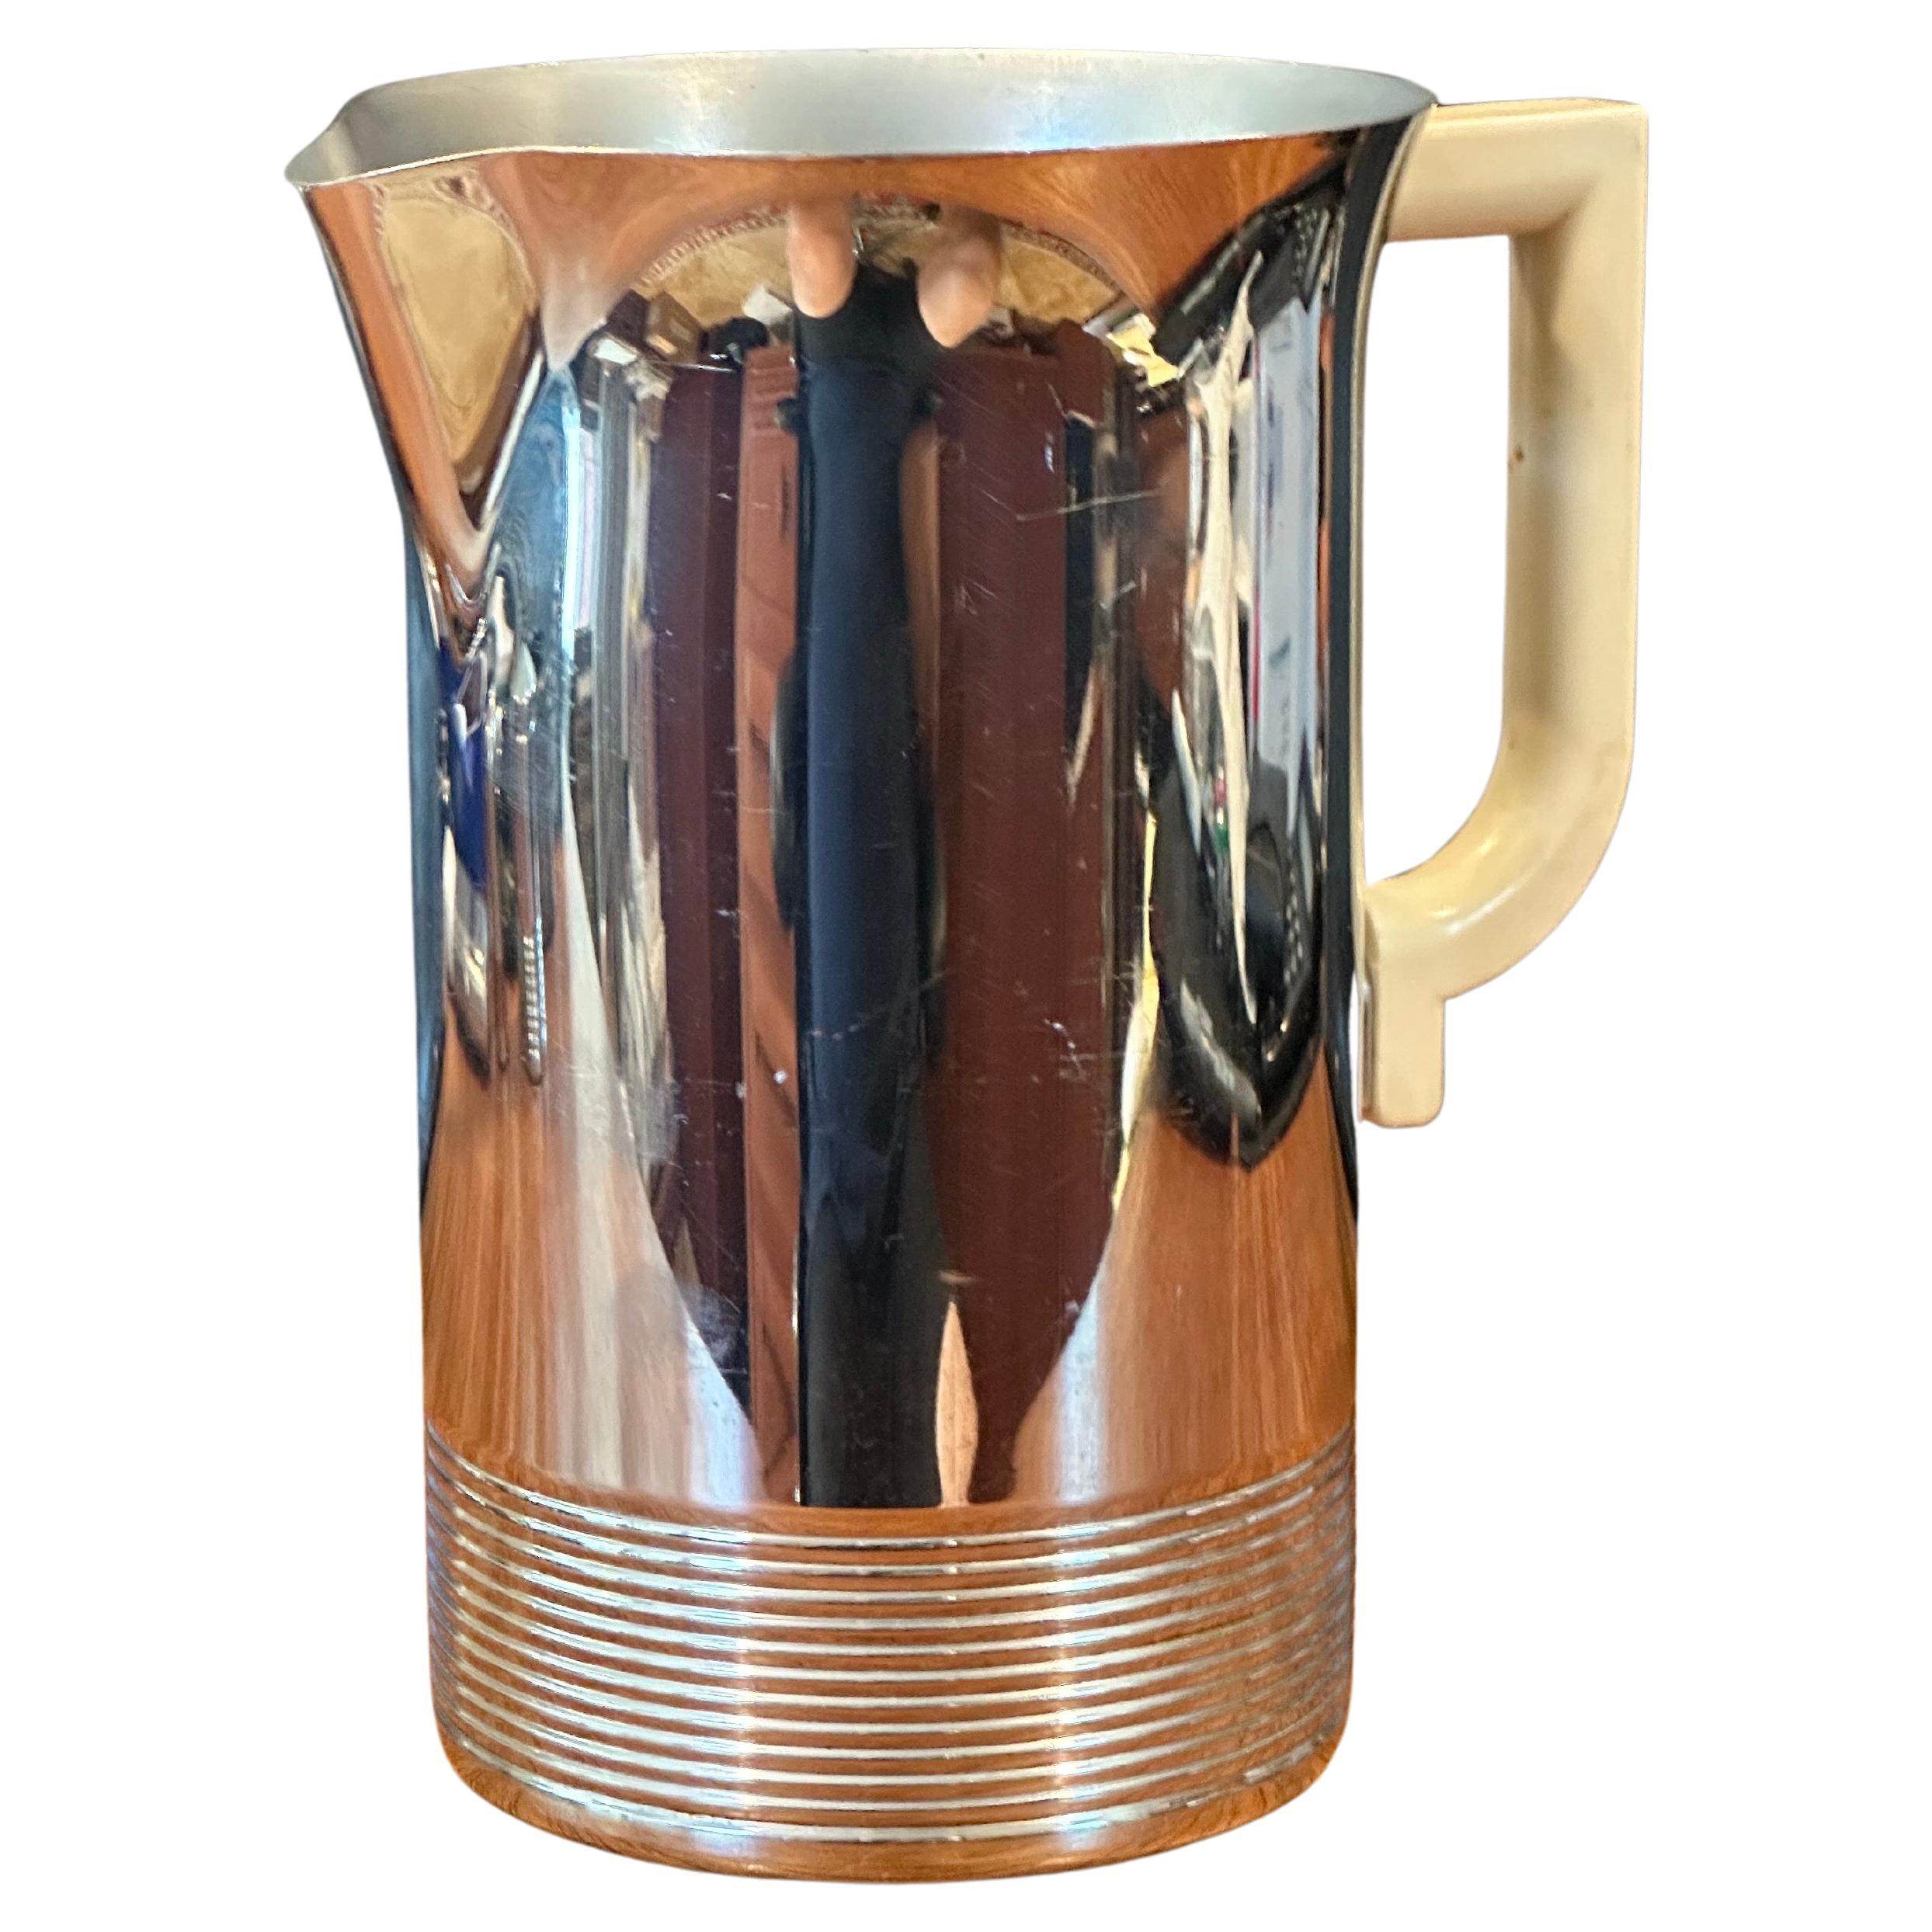 Art Deco chrome and bakelite water pitcher by Chase Co., circa 1930s.  The pitcher is in good vintage condition, measures 5W